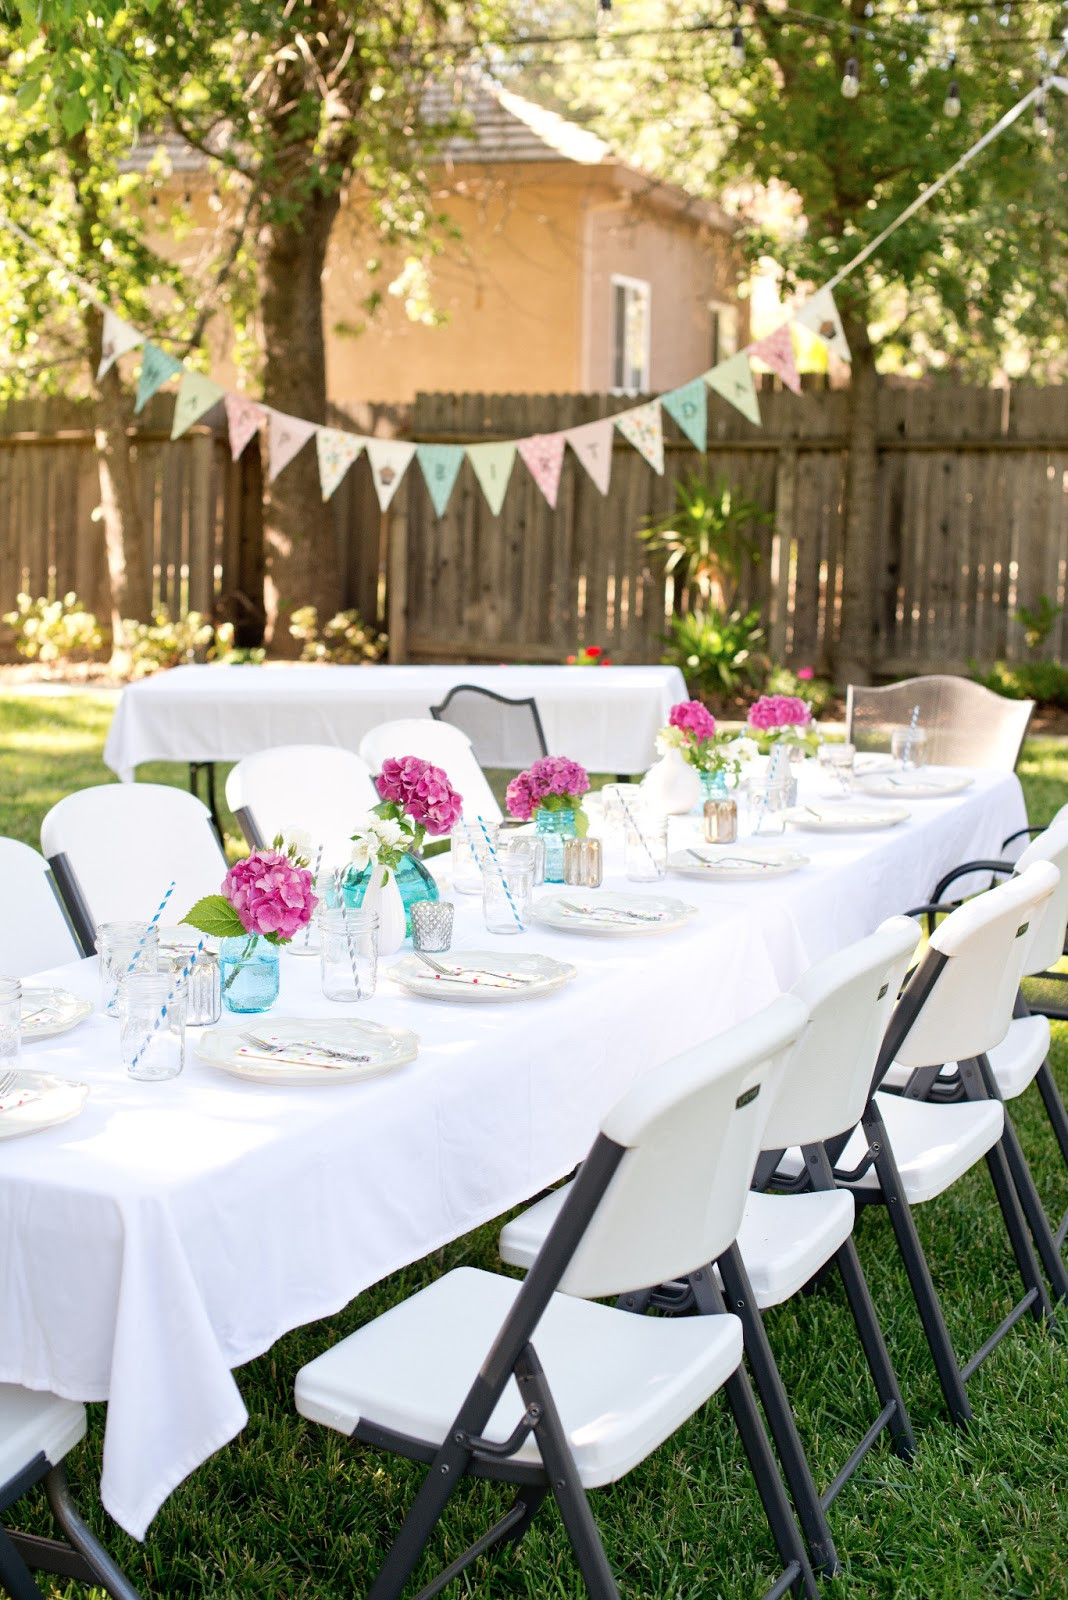 Graduation Garden Party Ideas
 Backyard Party Decorations For Unfor table Moments